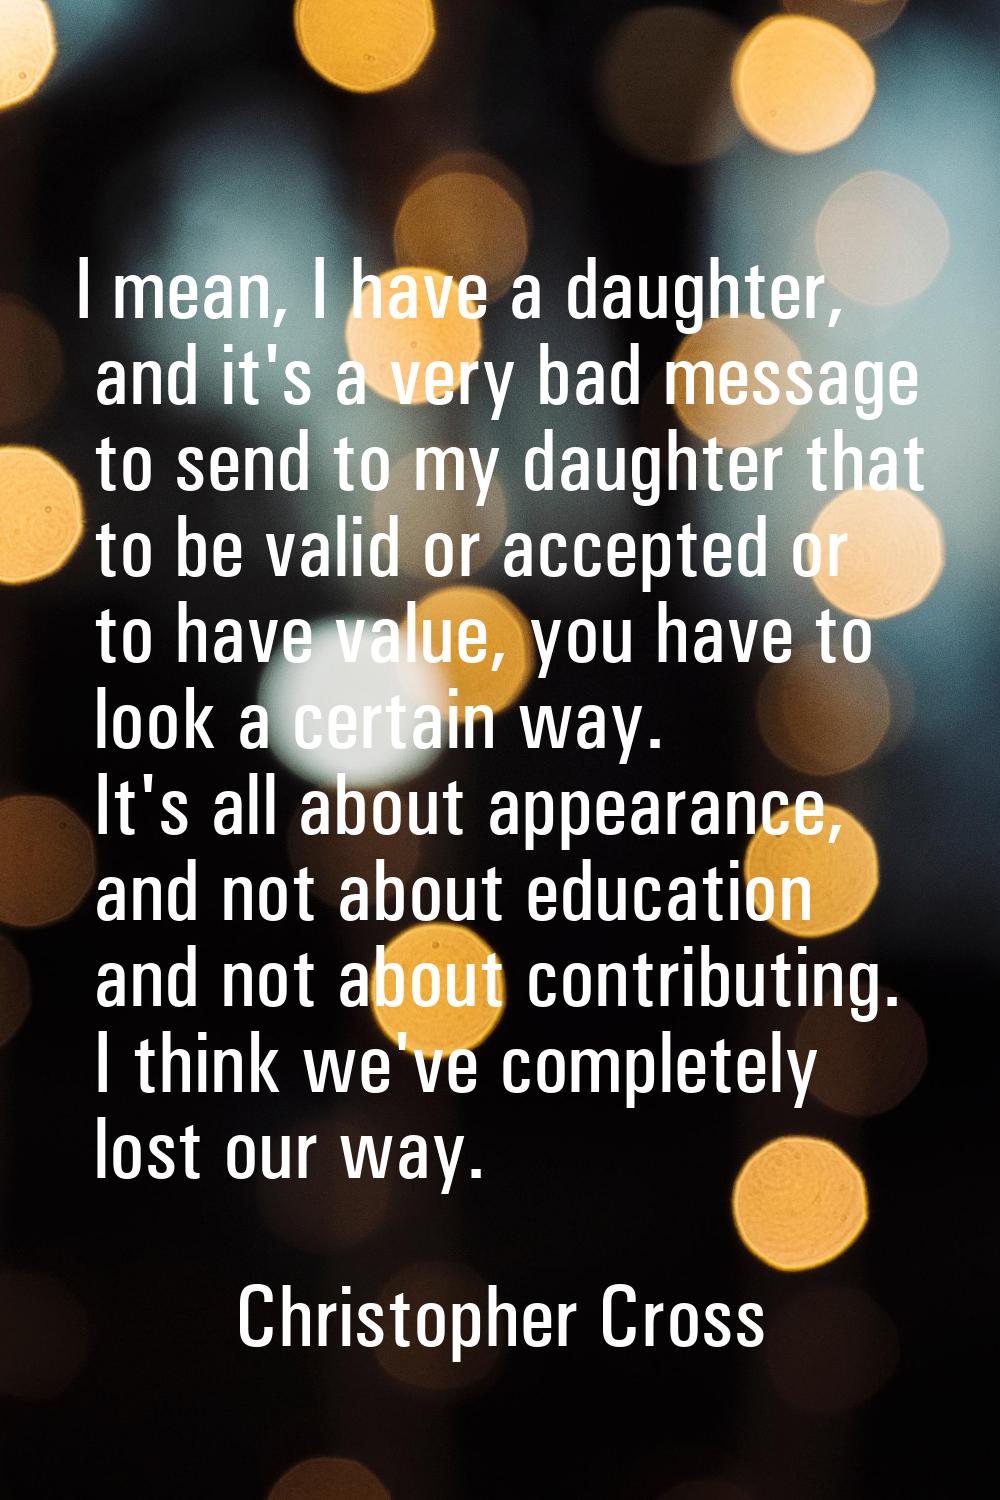 I mean, I have a daughter, and it's a very bad message to send to my daughter that to be valid or a